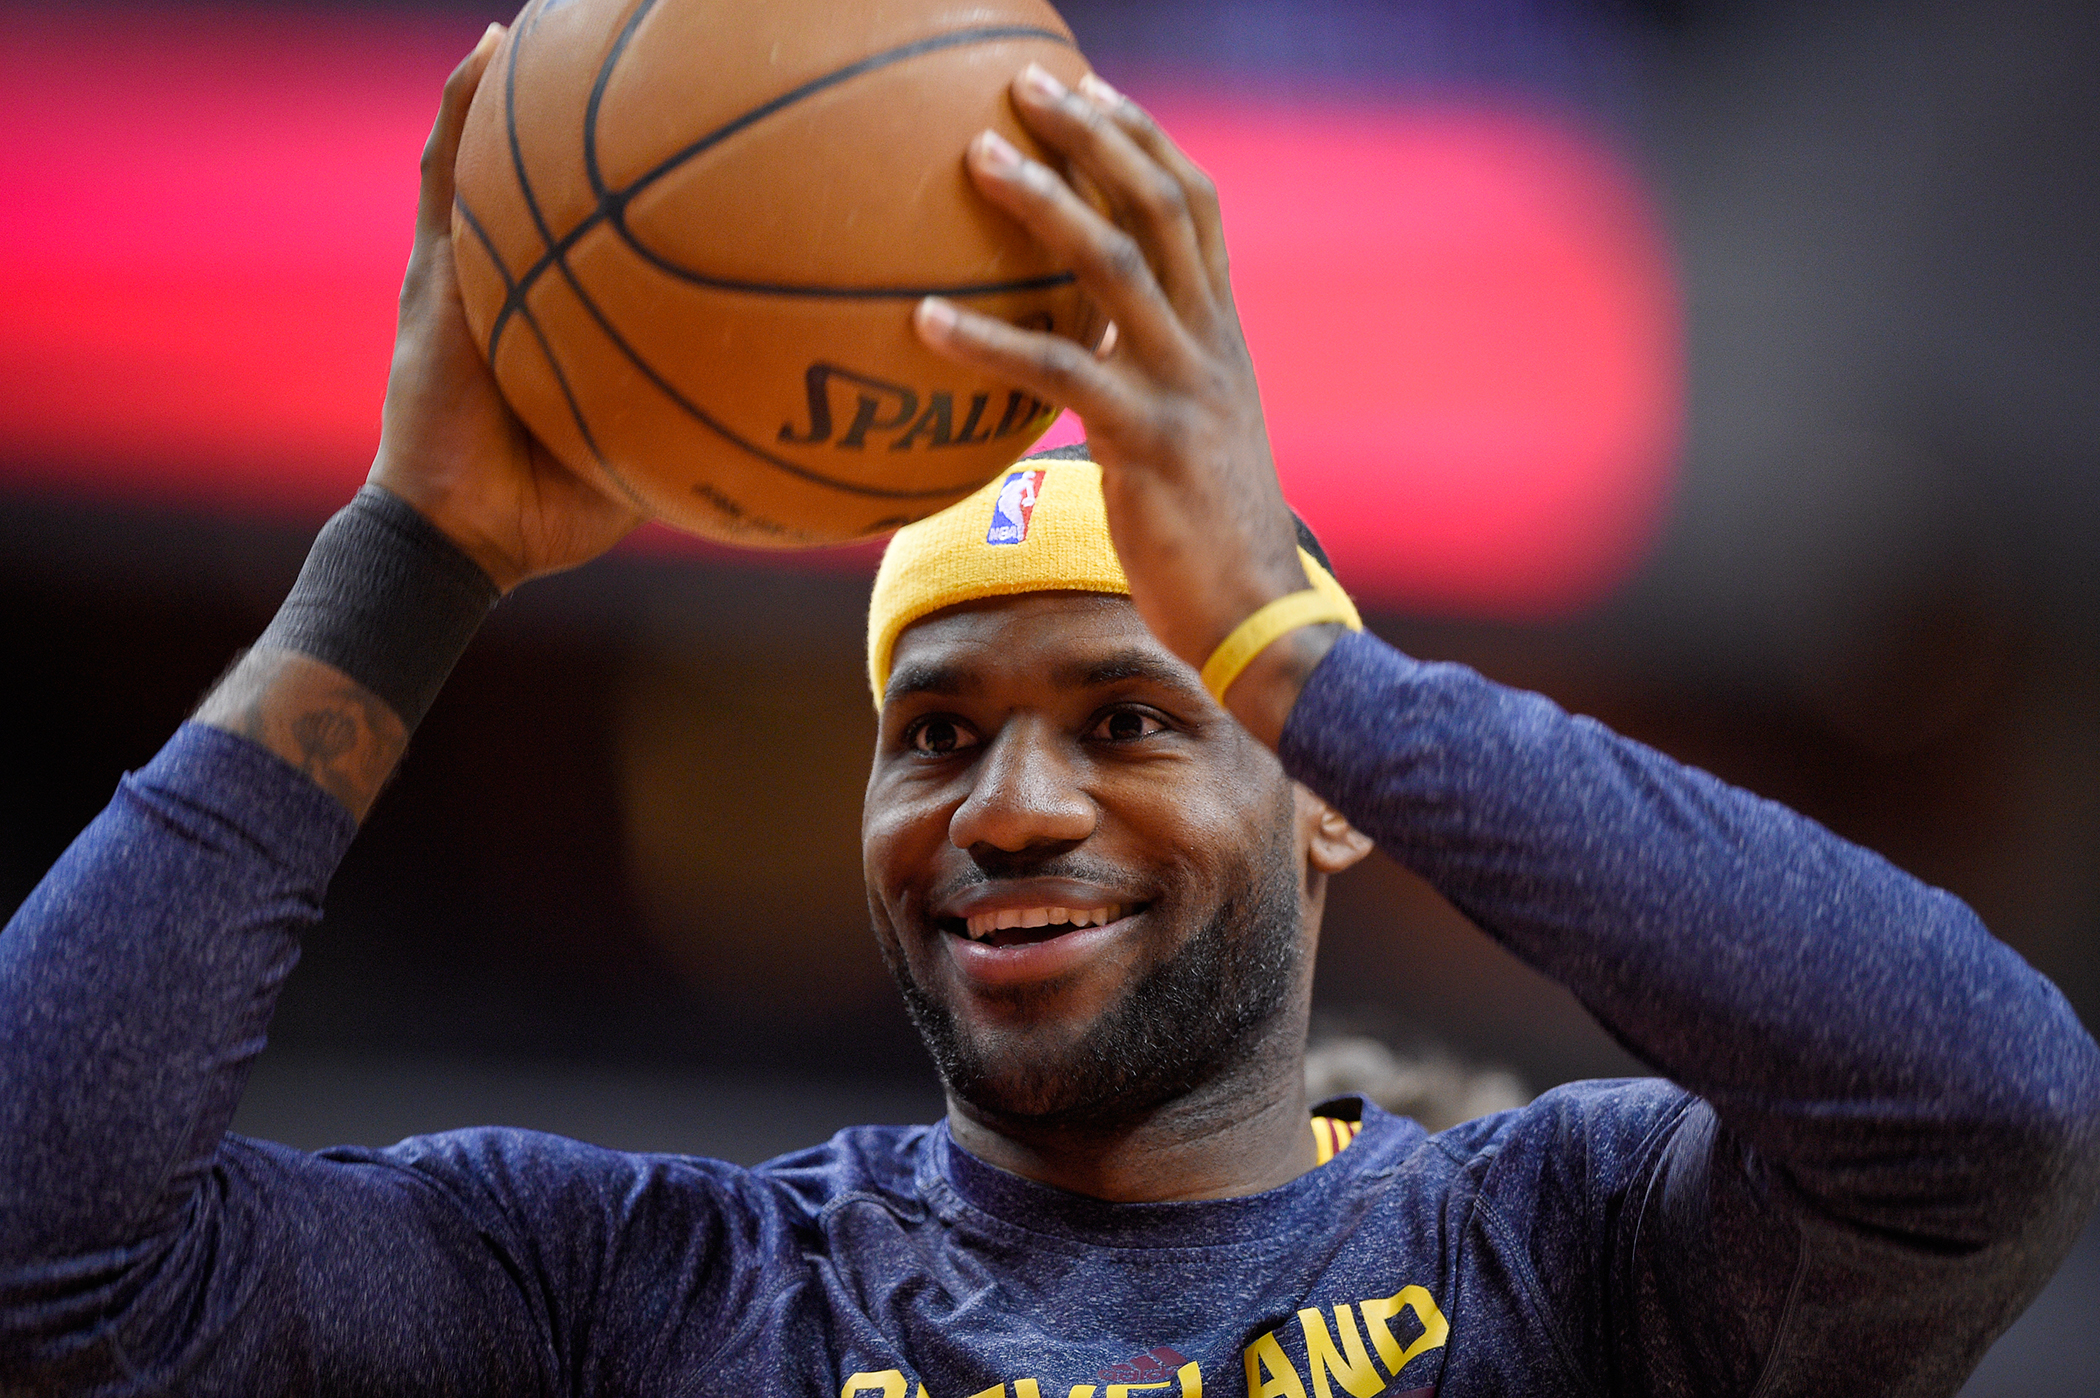 Cleveland Cavaliers forward LeBron James (23) during warmups before an NBA basketball game against the Washington Wizards, Friday, Feb. 20, 2015, in Washington.